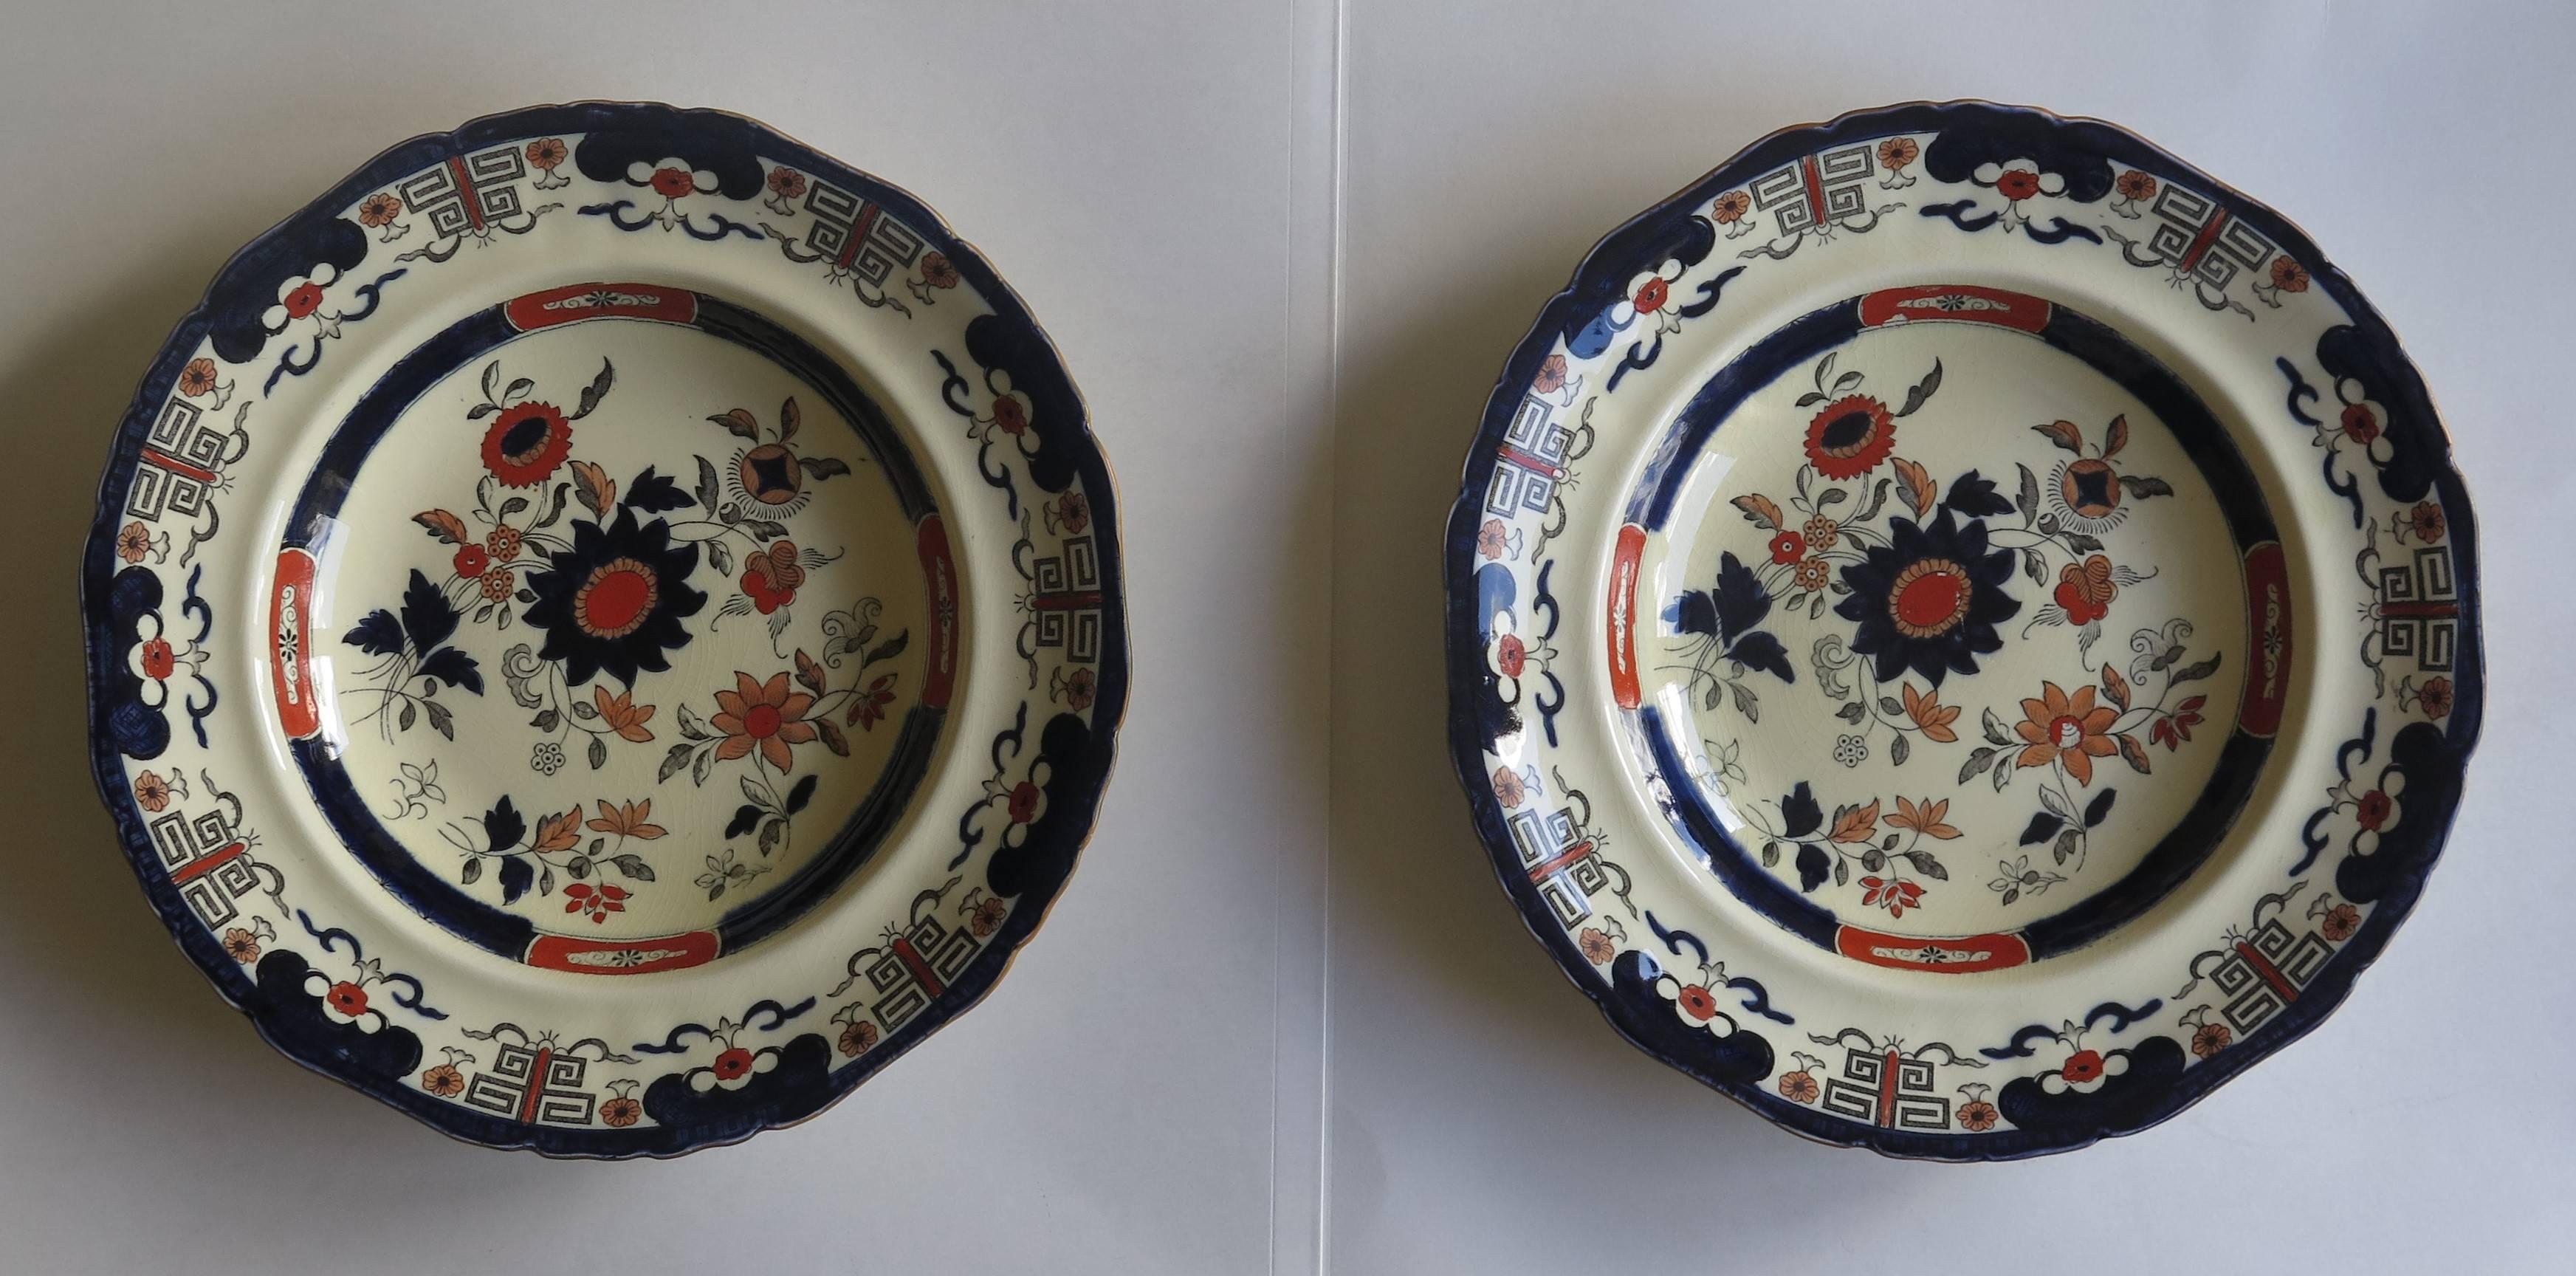 These are a good and very decorative pair of ironstone bowls or plates made by Mason's ironstone, Staffordshire, England. 

The plates are boldly decorated in the Daisy pattern, which is illustrated on page 57 of A Guide to Mason's Patent Ironstone